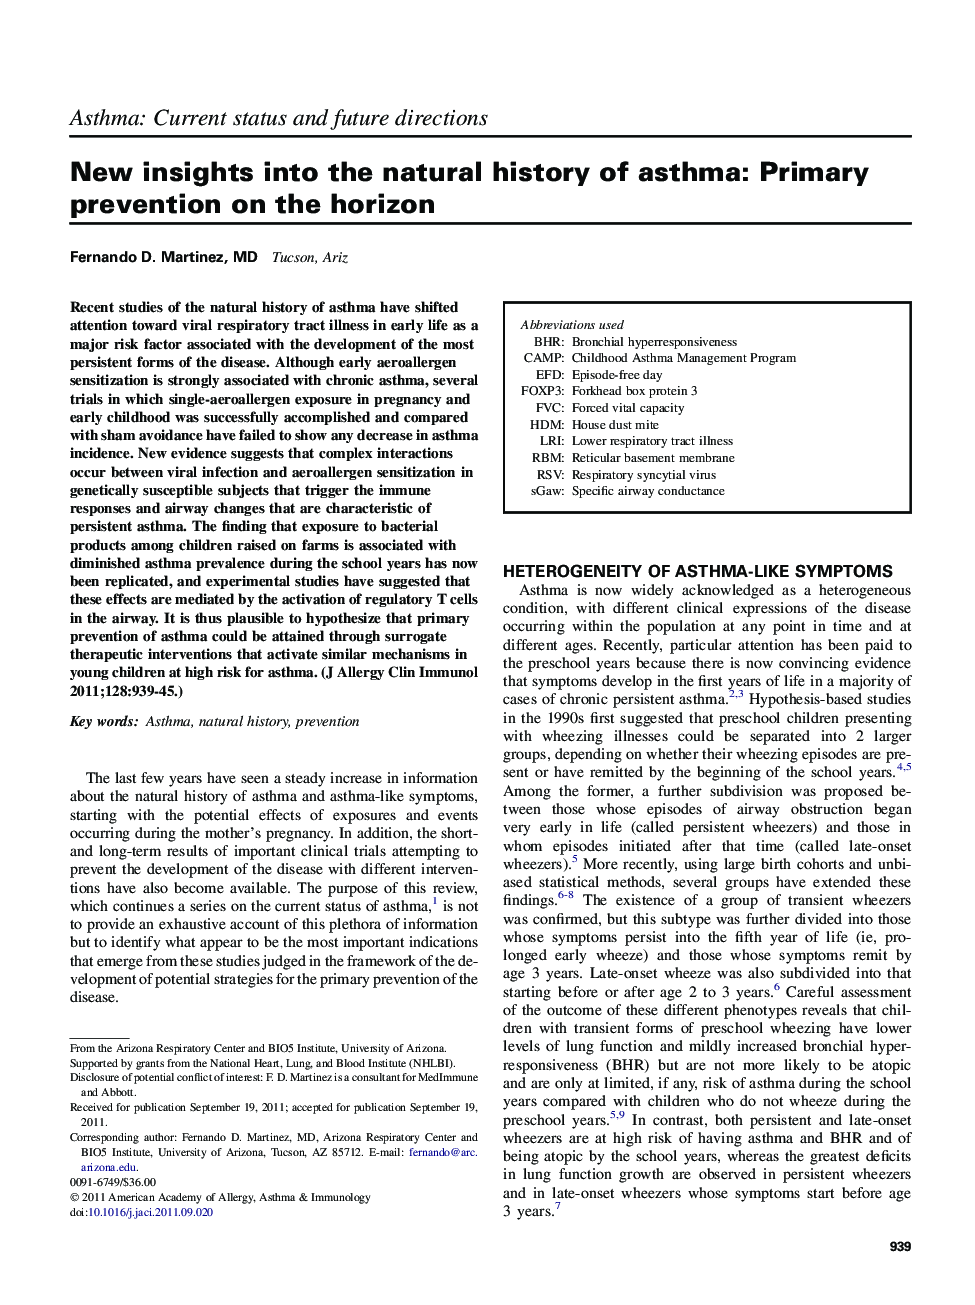 New insights into the natural history of asthma: Primary prevention on the horizon 